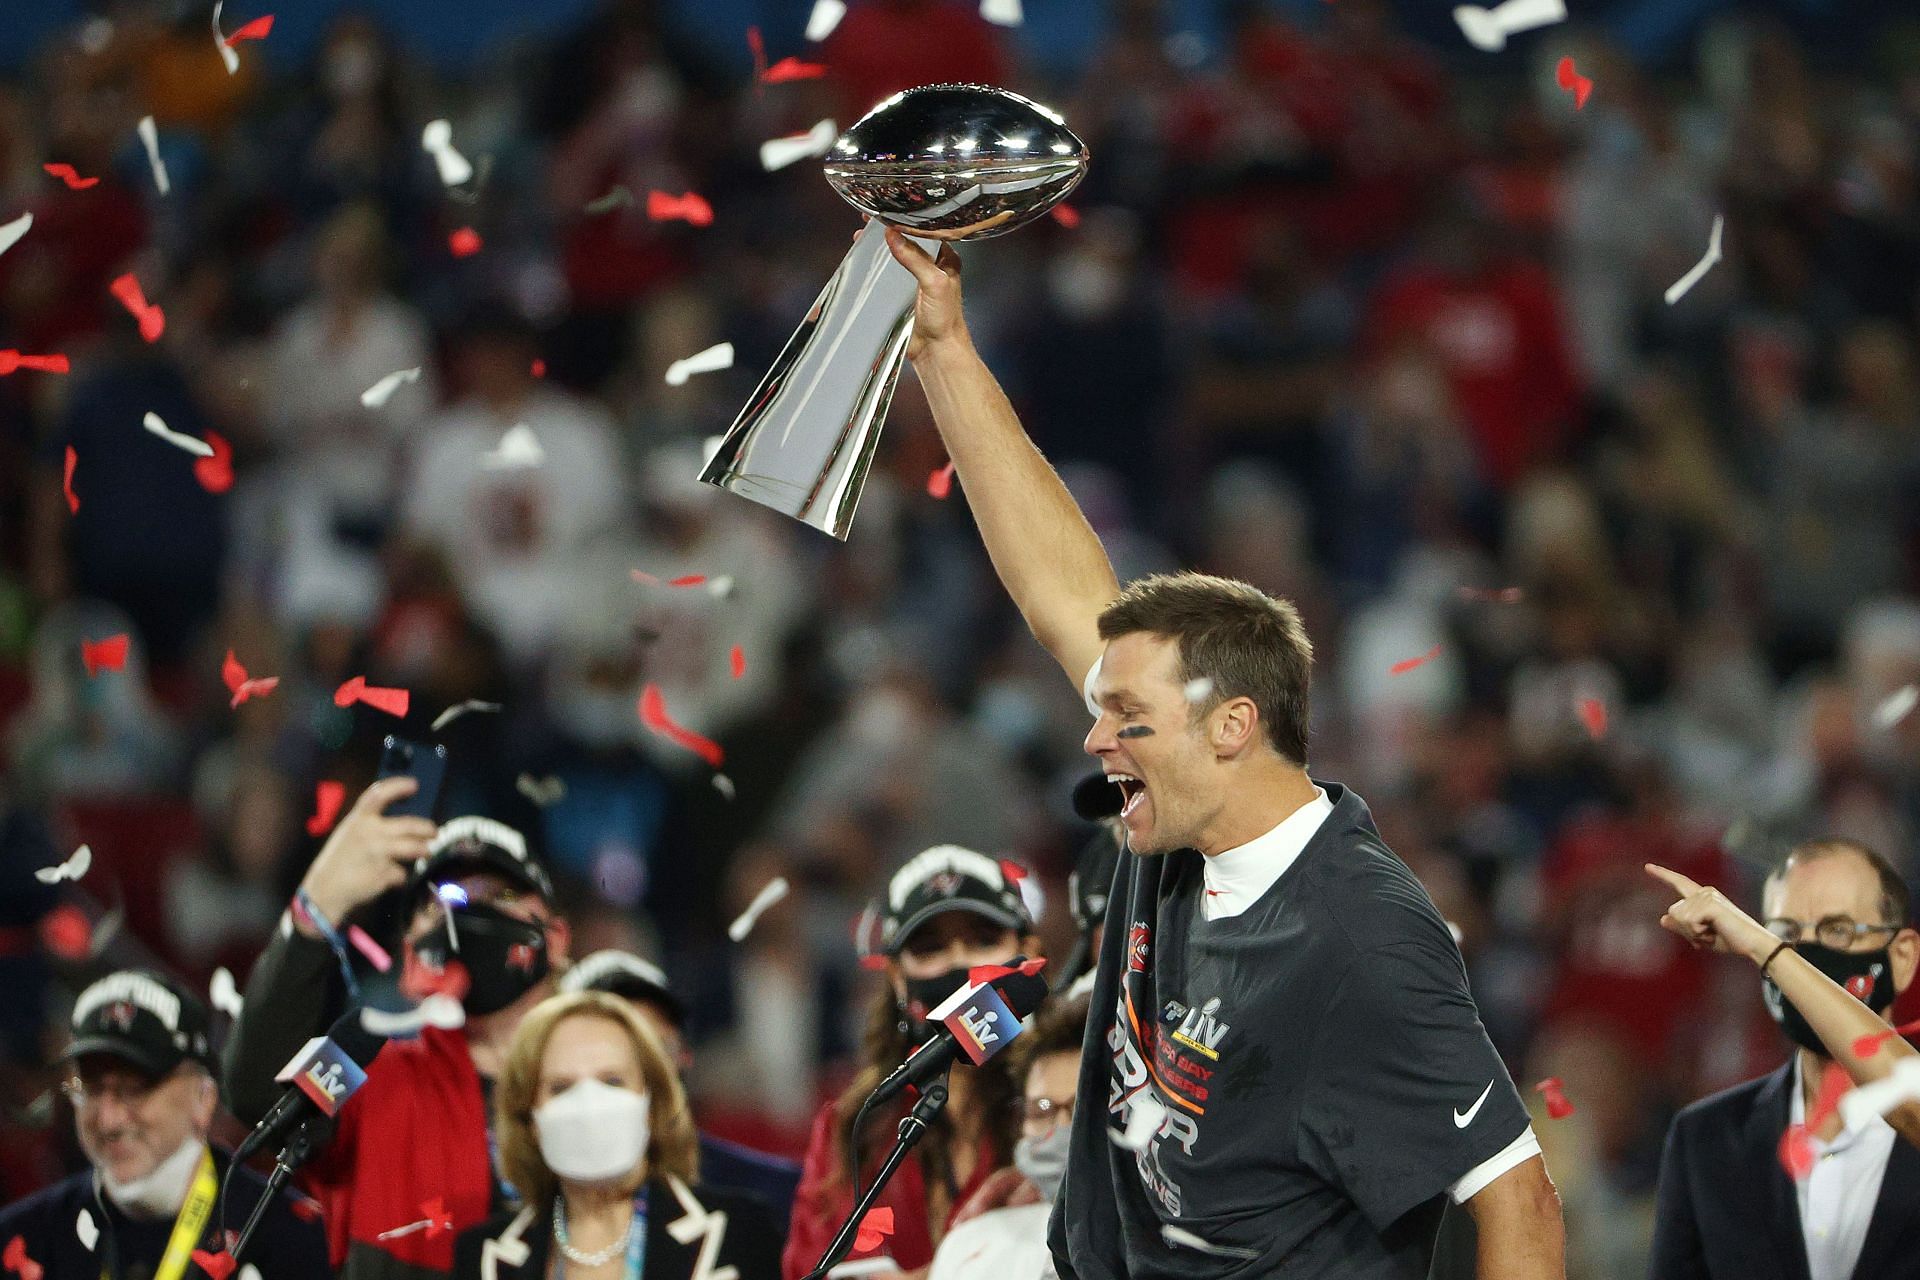 Brady after winning Super Bowl LV over the Chiefs